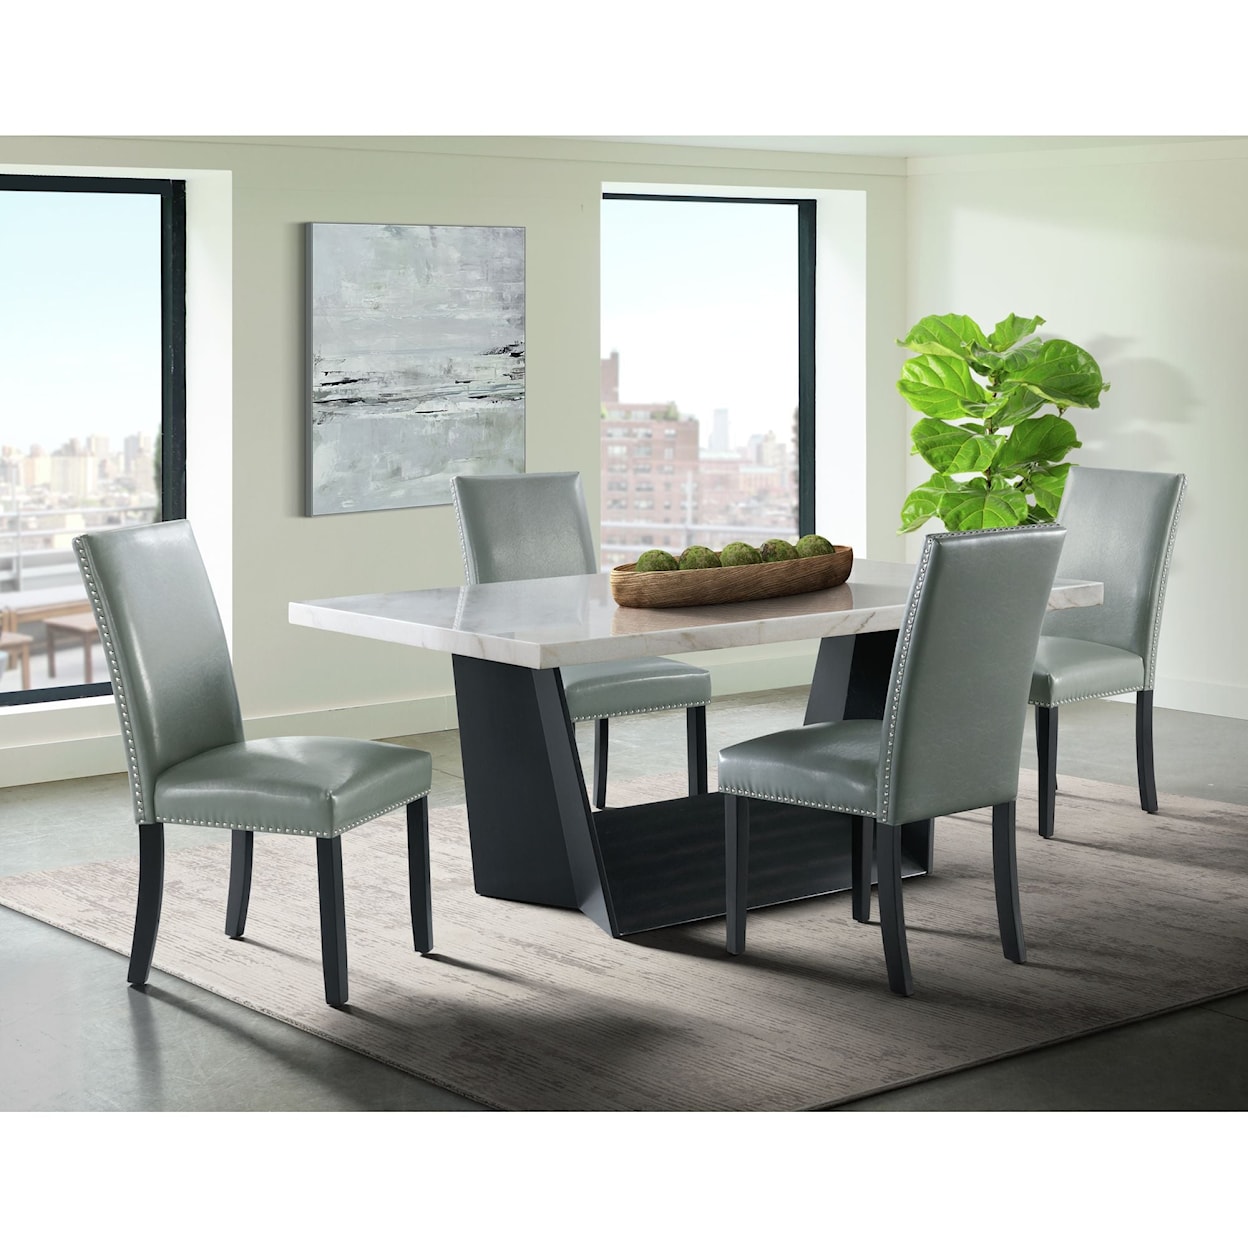 Elements Beckley Dining Table with Marble Top